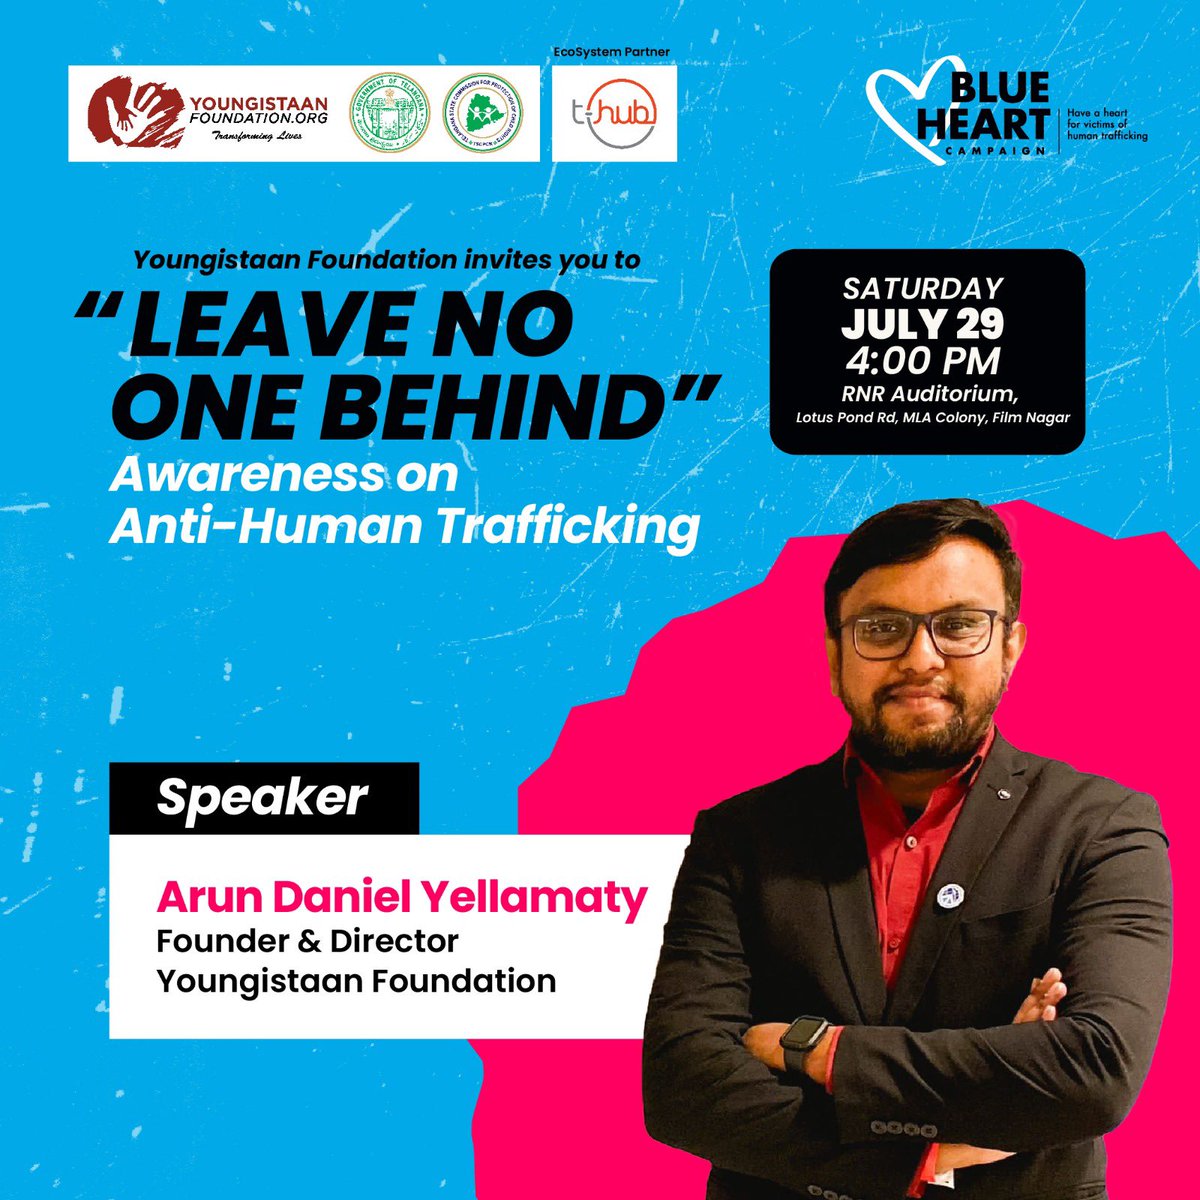 Join us for a special public dialogue to commemorate ‘World Day Against Trafficking in Persons’. Highlights: Survivor Stories, Art Exhibition, Lightning Talks, live performance from @bandcapricio and more. #EndHumanTrafficking #LeaveNoOneBehind @HiHyderabad @swachhhyd #India